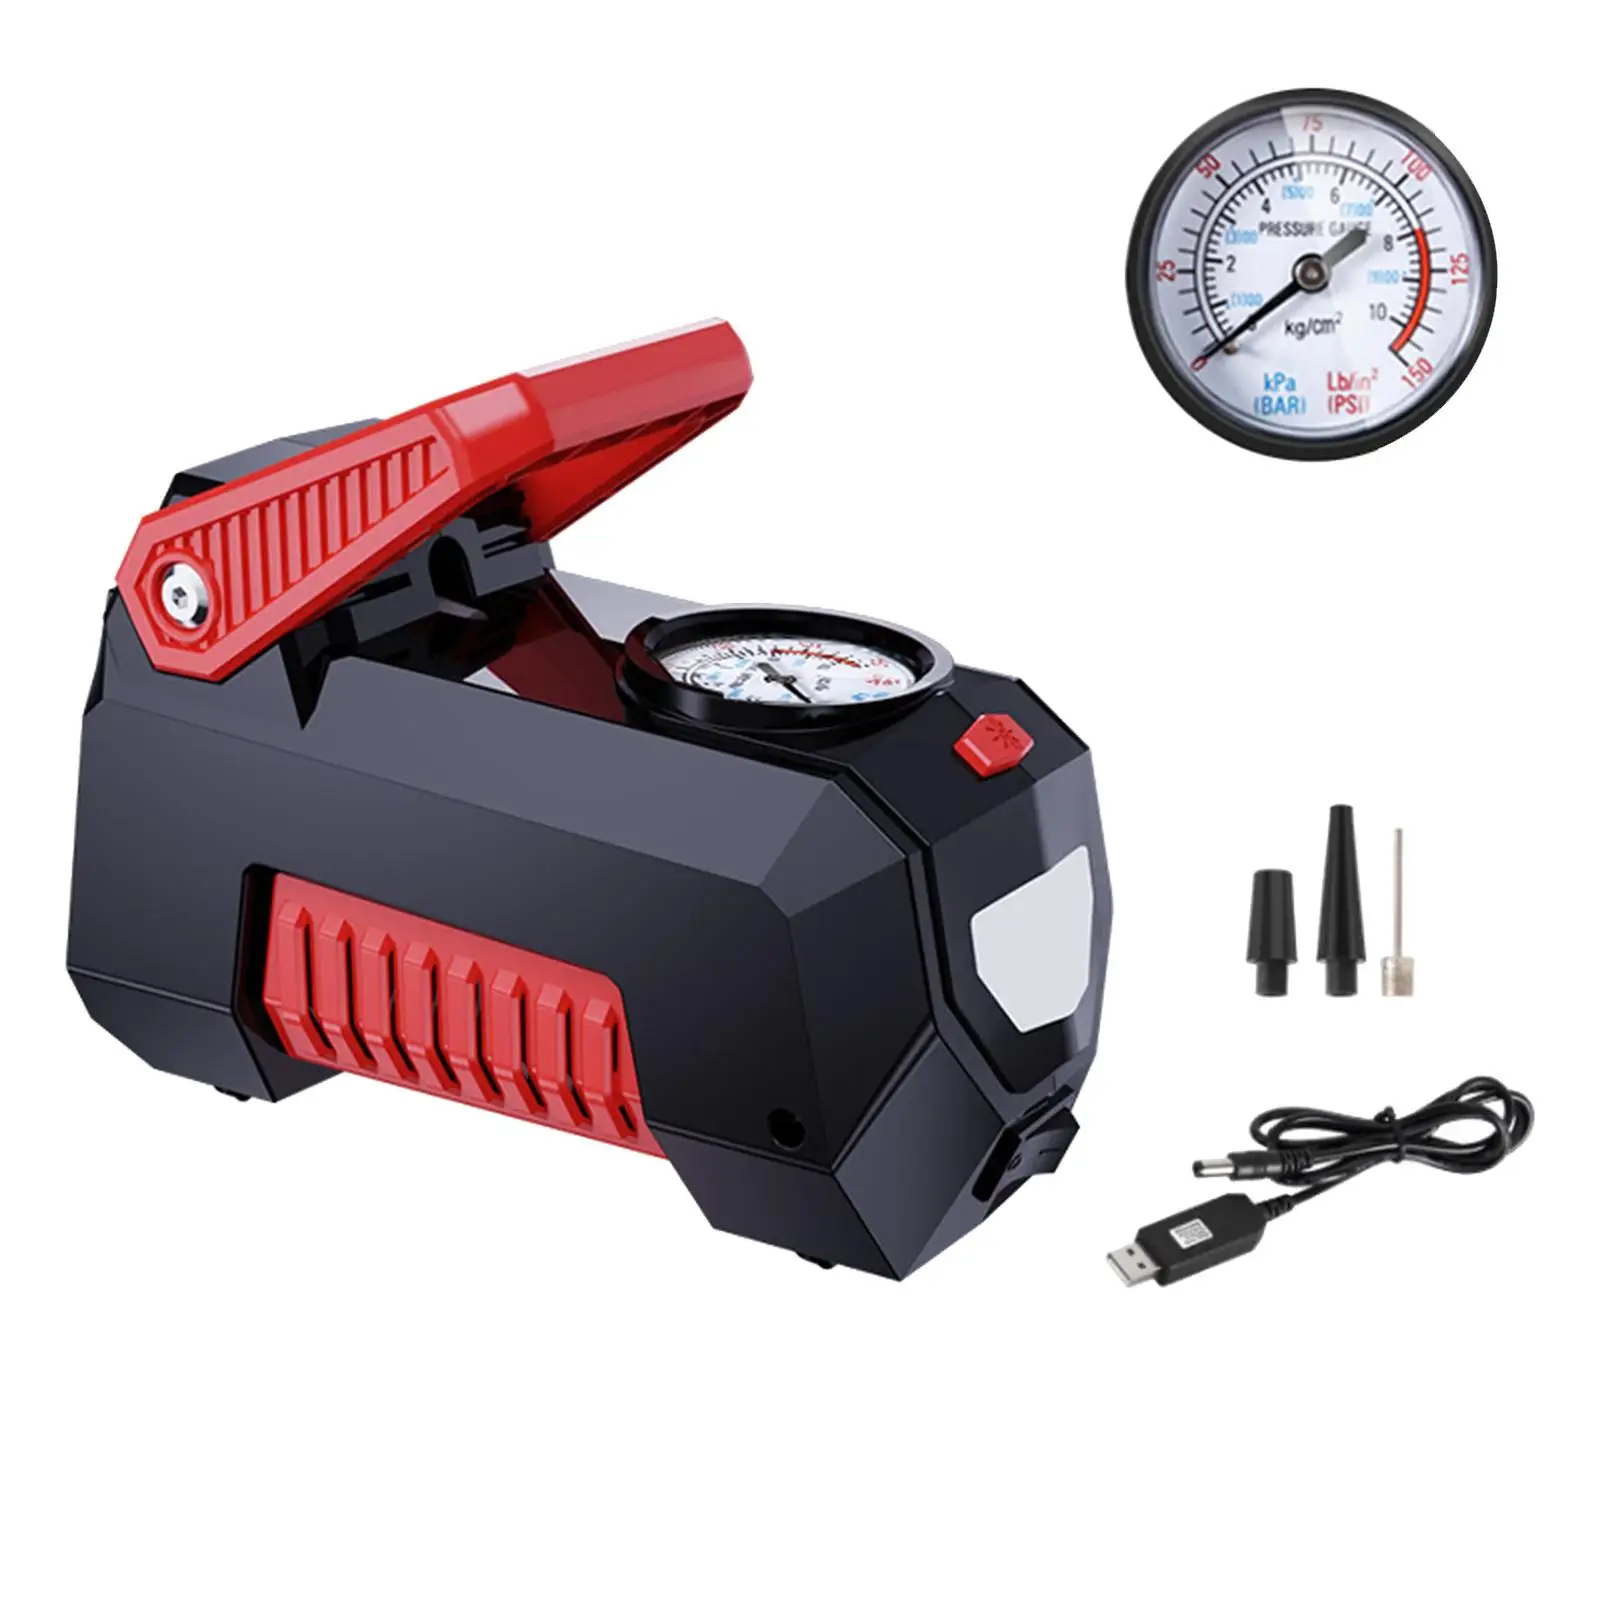 Auto Tire Pump Cordless Portable Tire Inflator for Bicycle Motorcycles Basketball